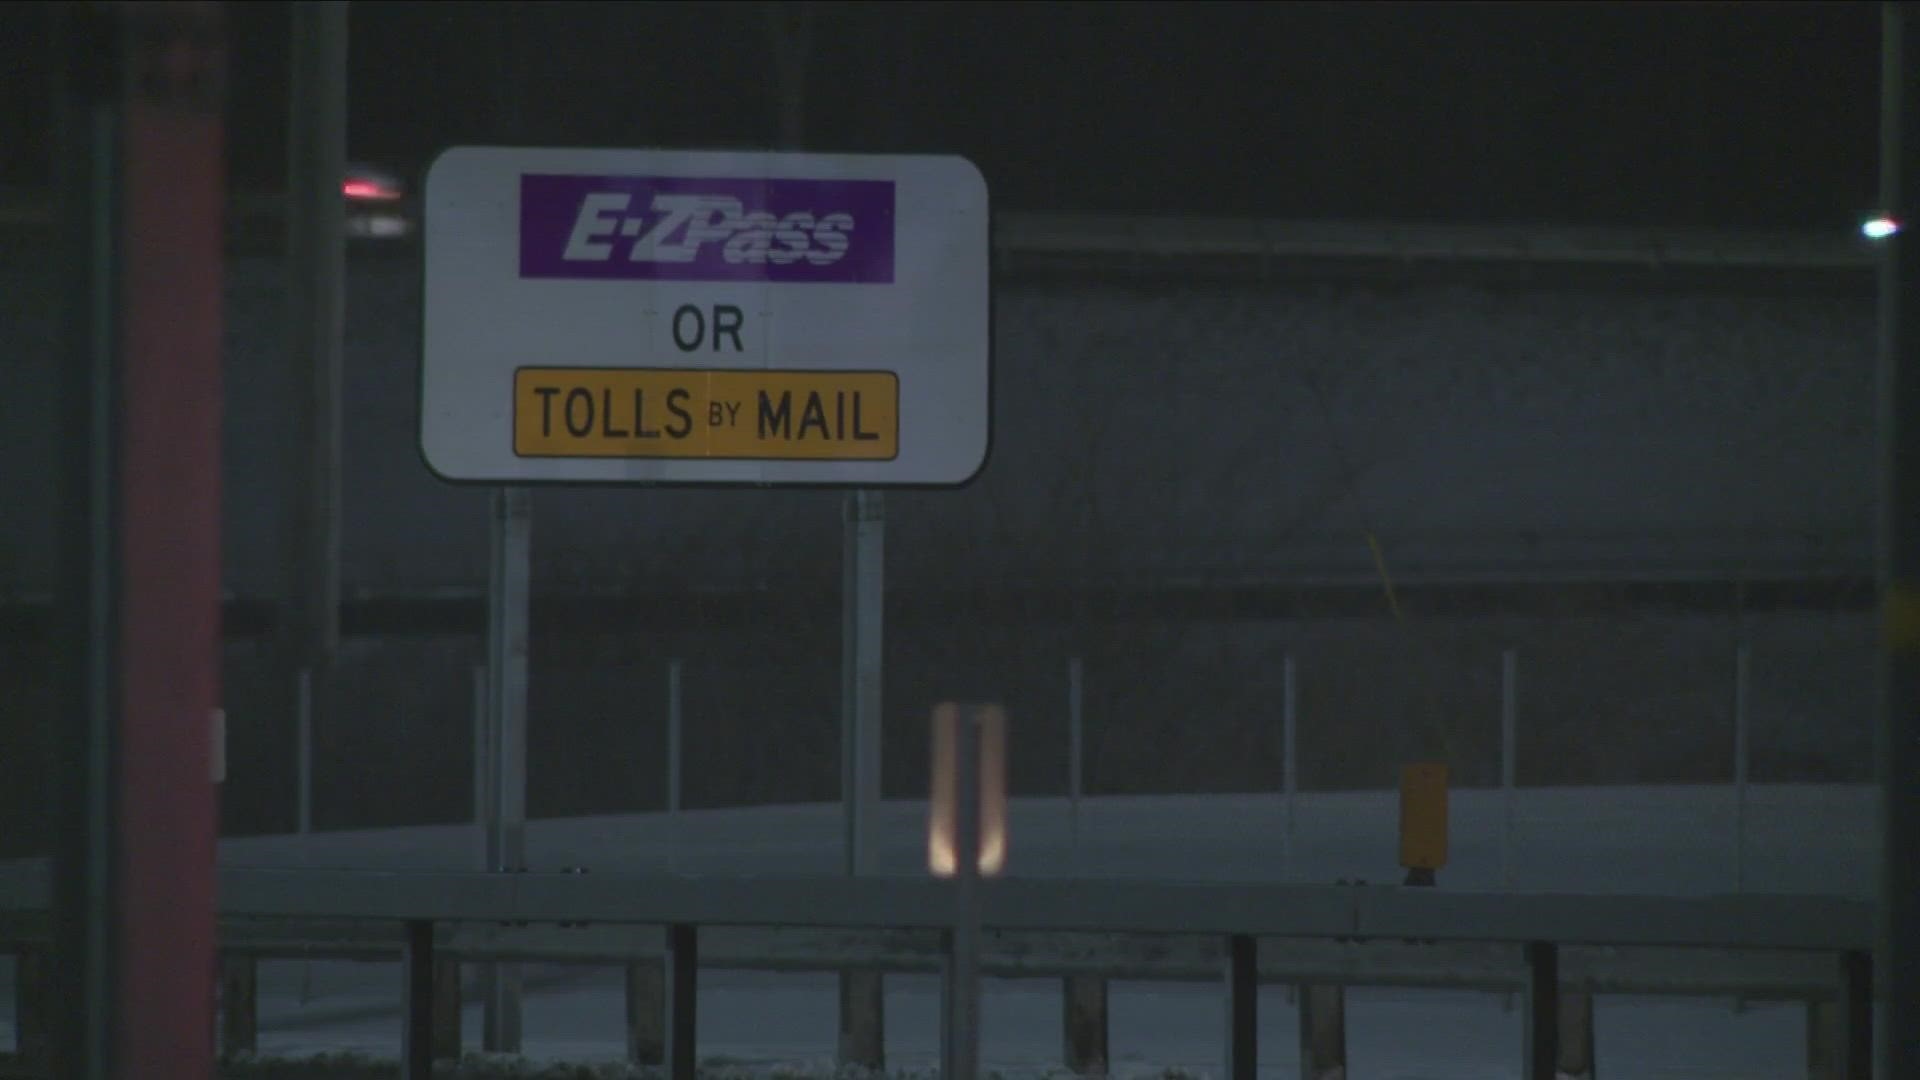 The New York State Thruway Authority would need to hold public hearings before any toll hike take effect.